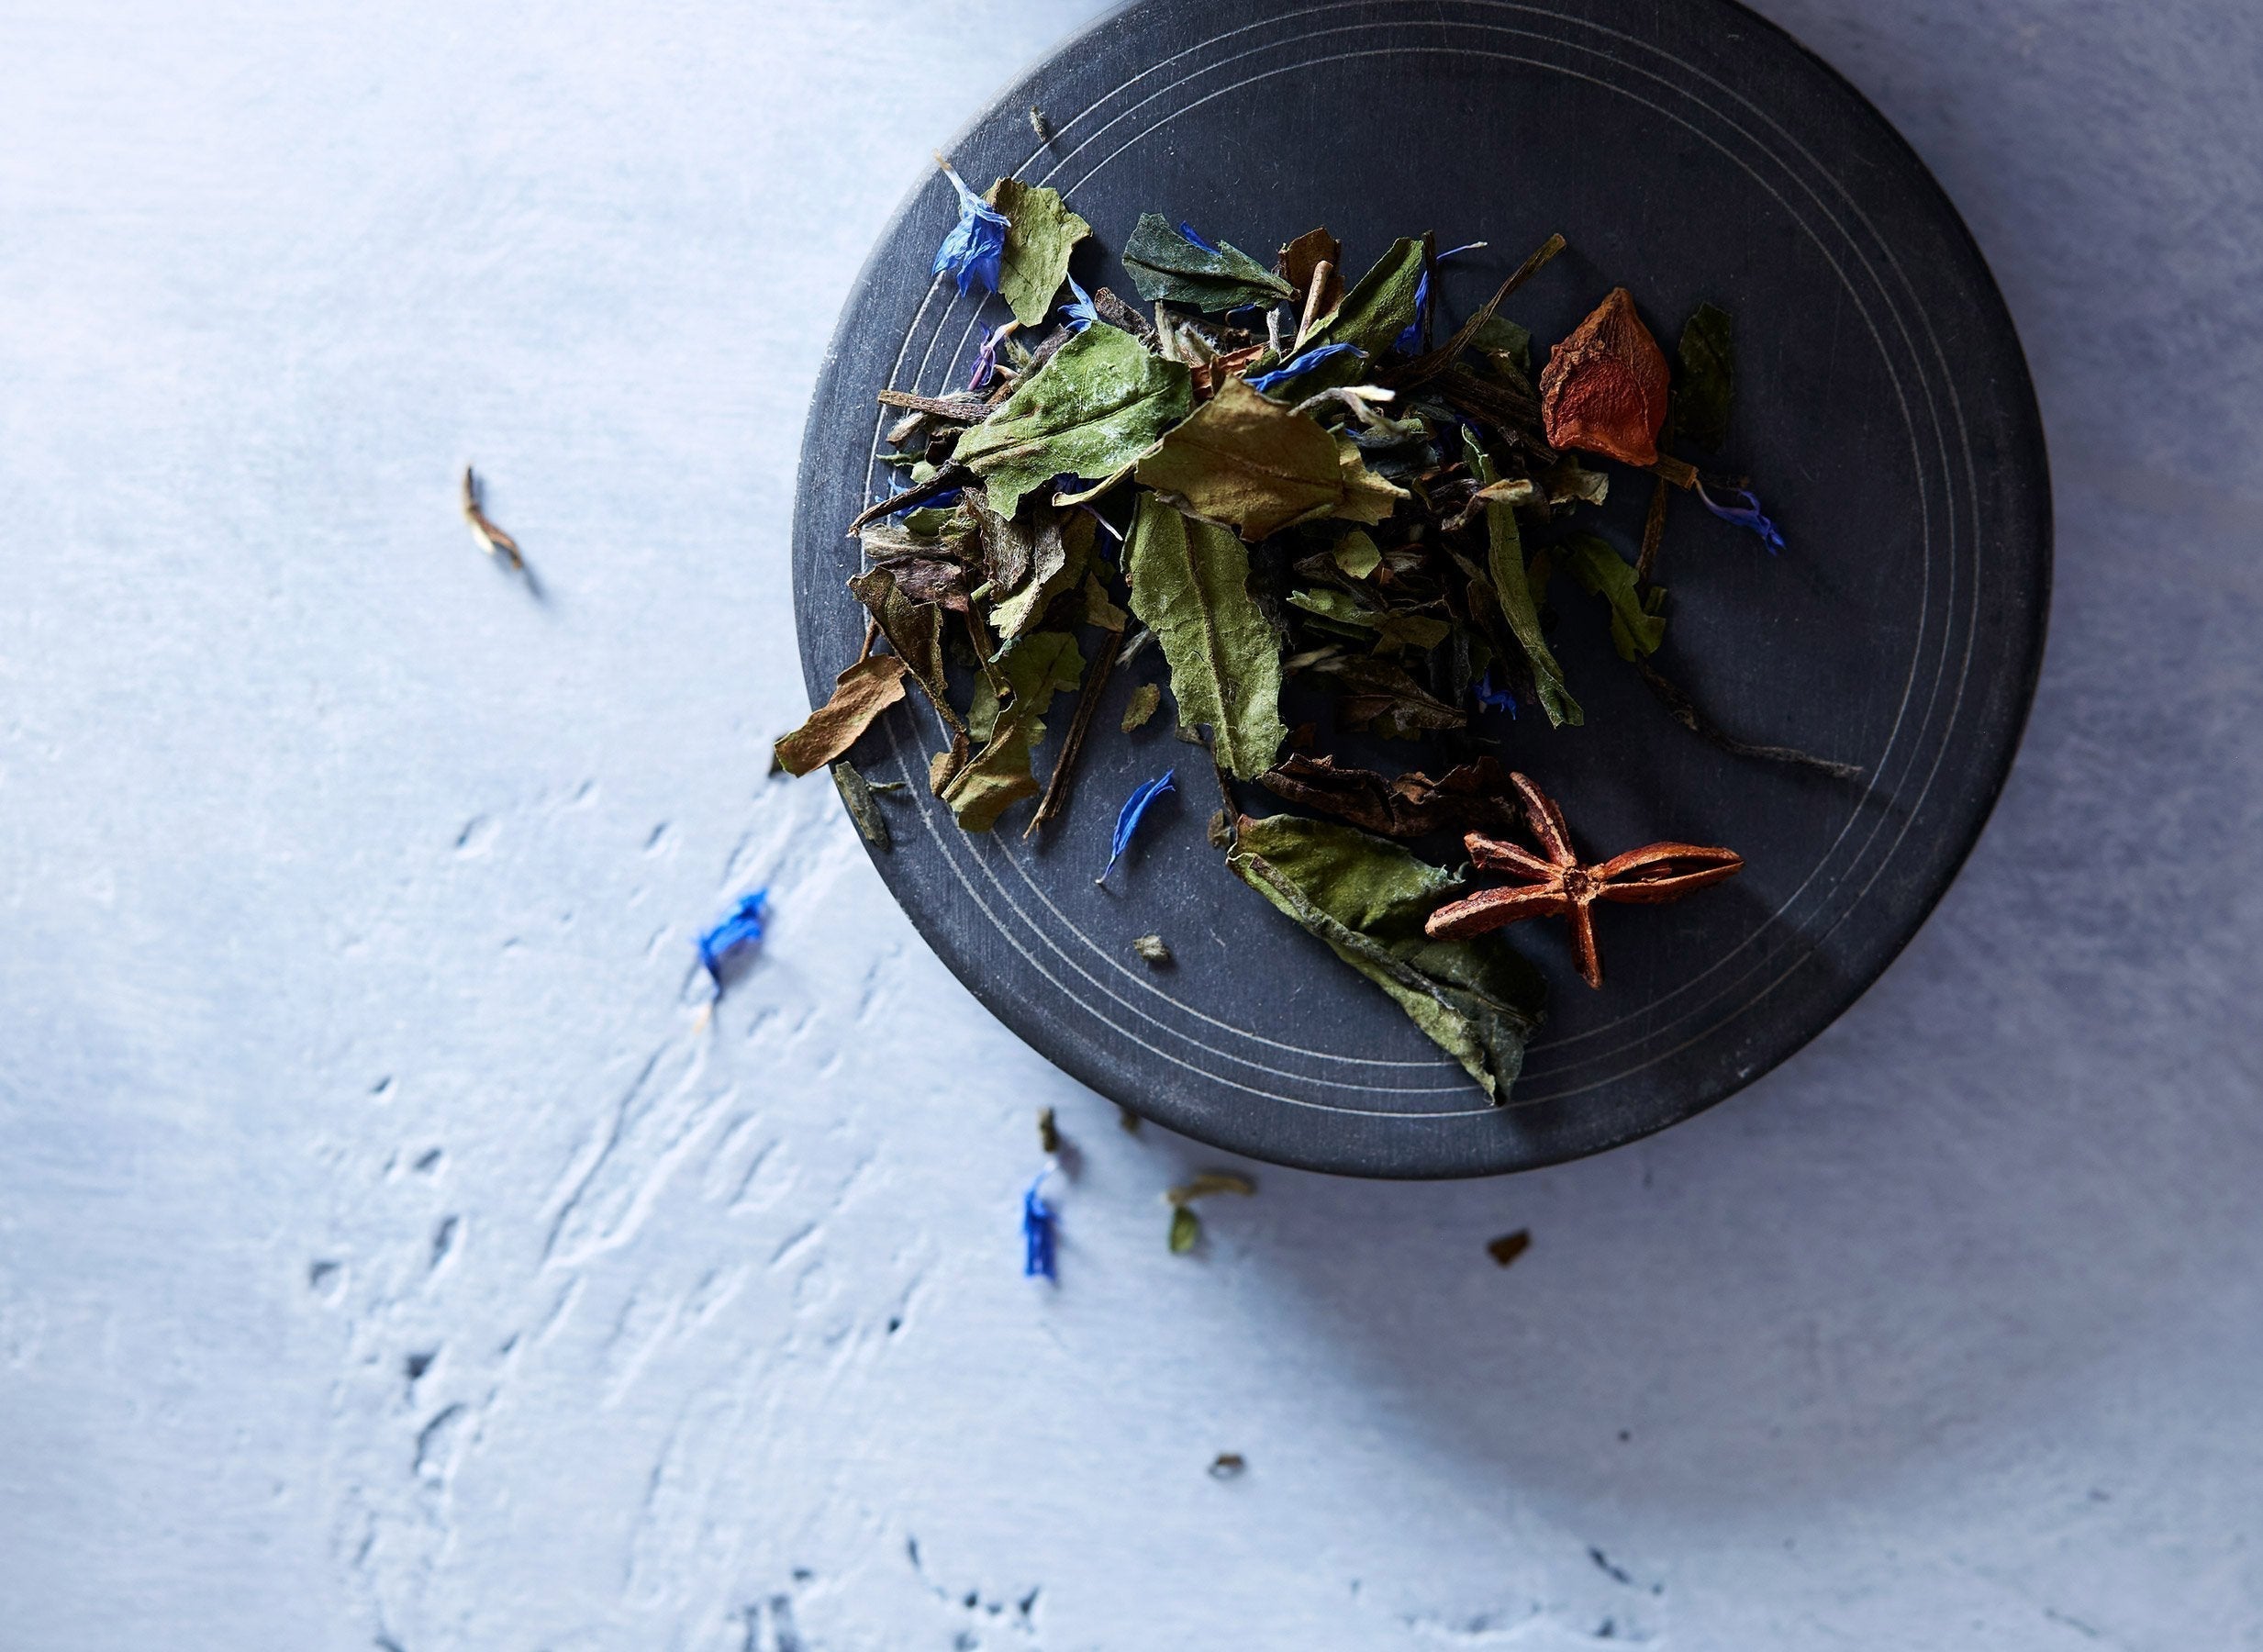 Indulge in premium loose leaf tea blends, made of the finest herbs and botanicals. Hand blended in our Brooklyn Atelier.